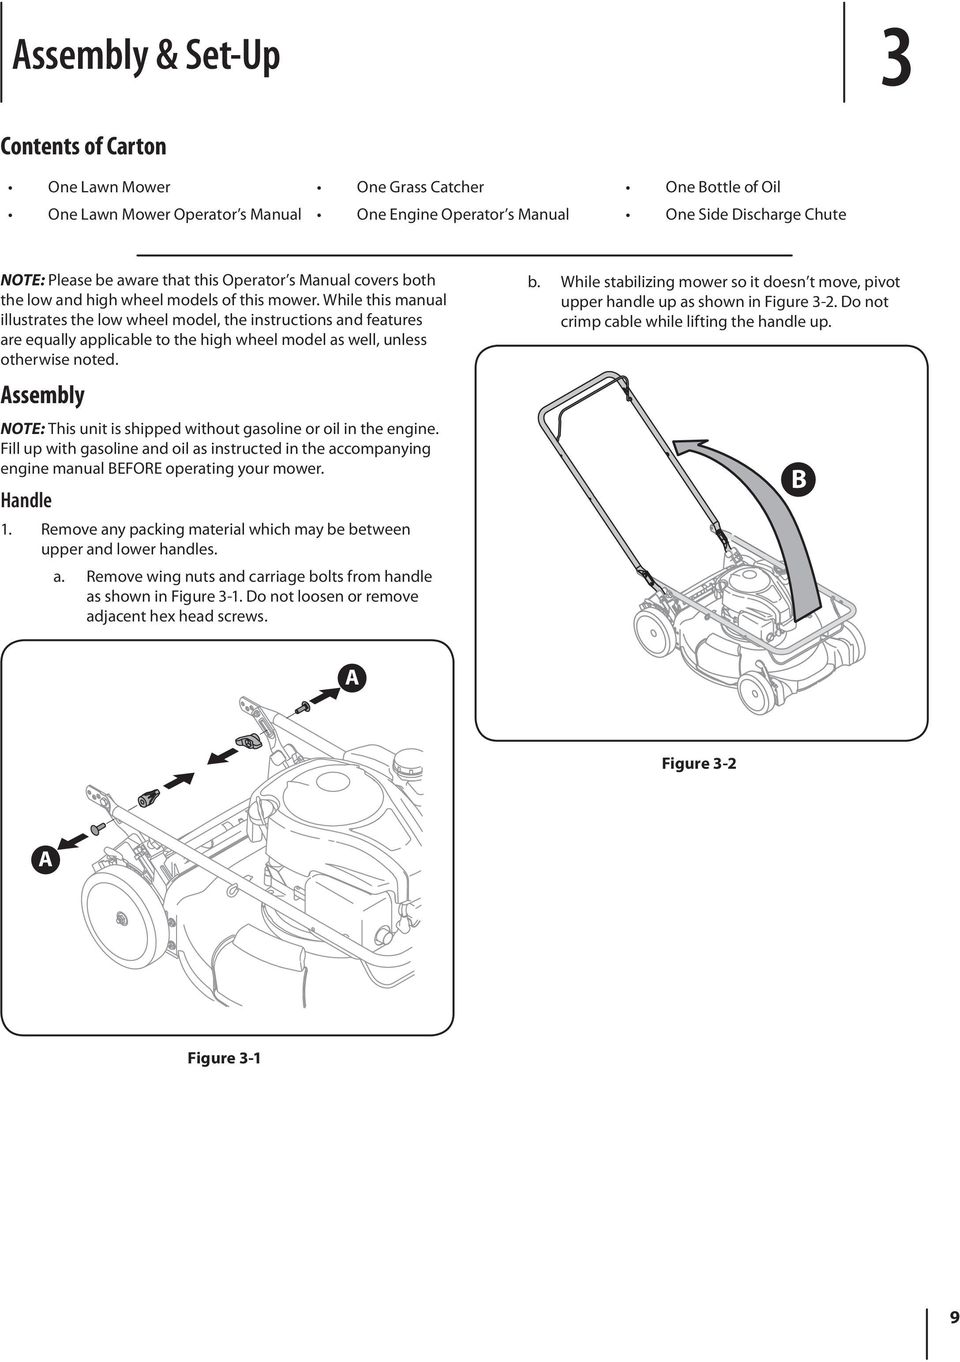 While this manual illustrates the low wheel model, the instructions and features are equally applicable to the high wheel model as well, unless otherwise noted.